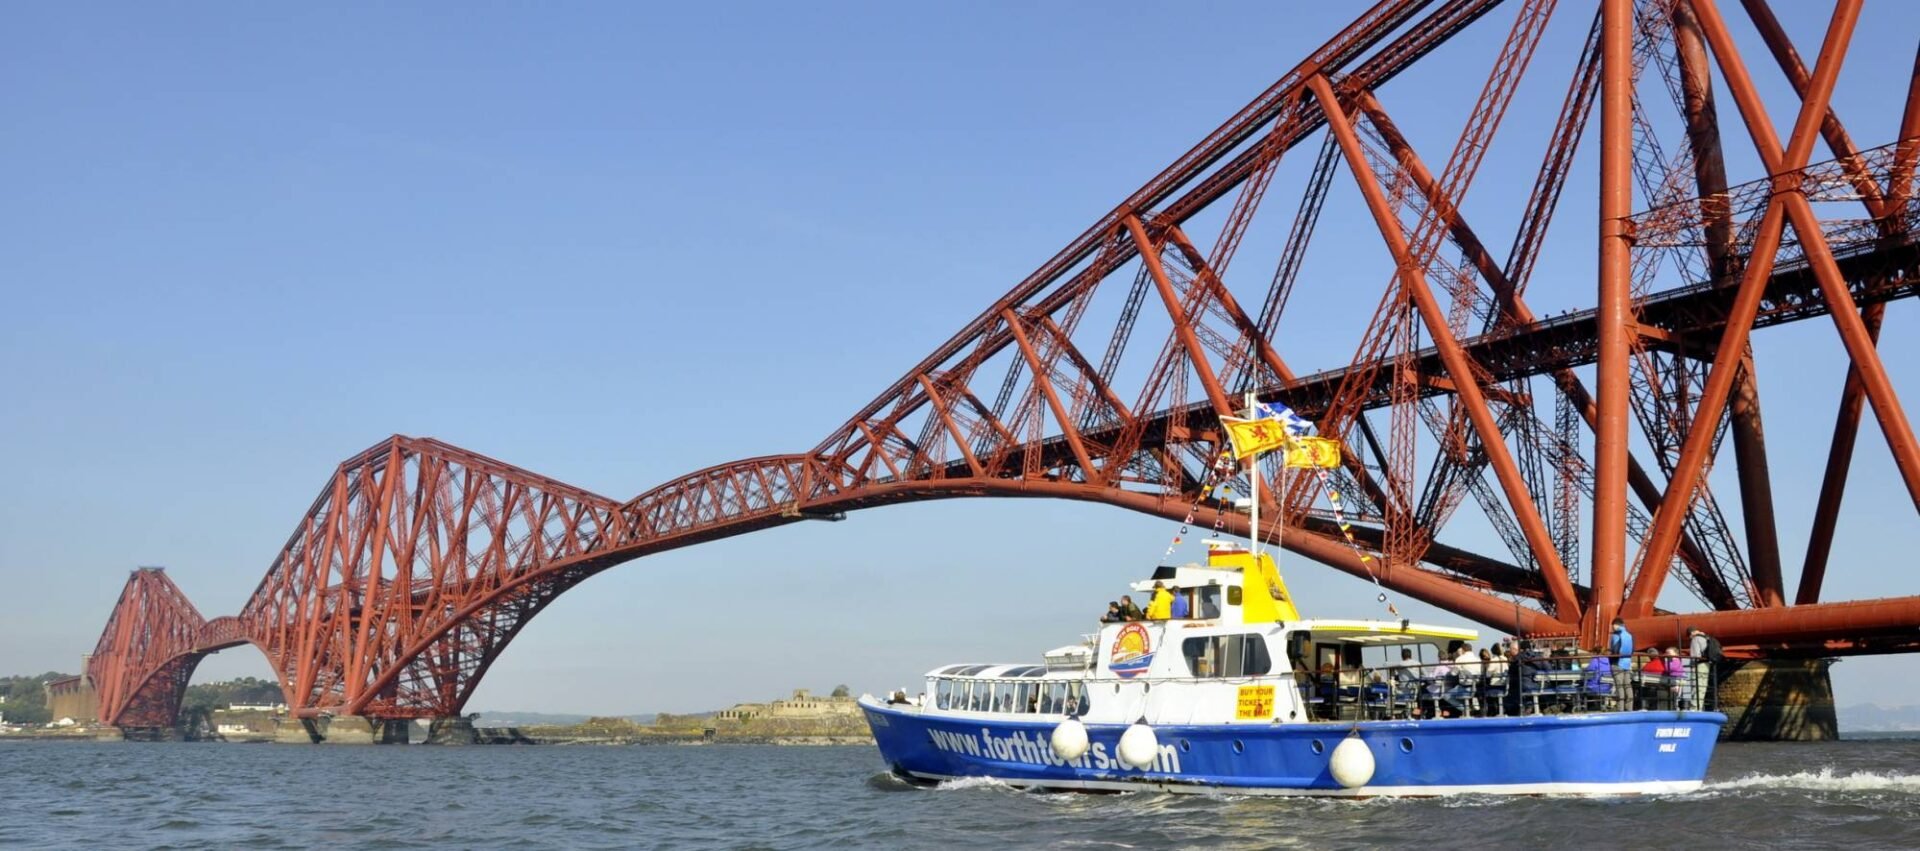 Forth Boat Tours Three Bridges Cruise,© Forth Boat Tours